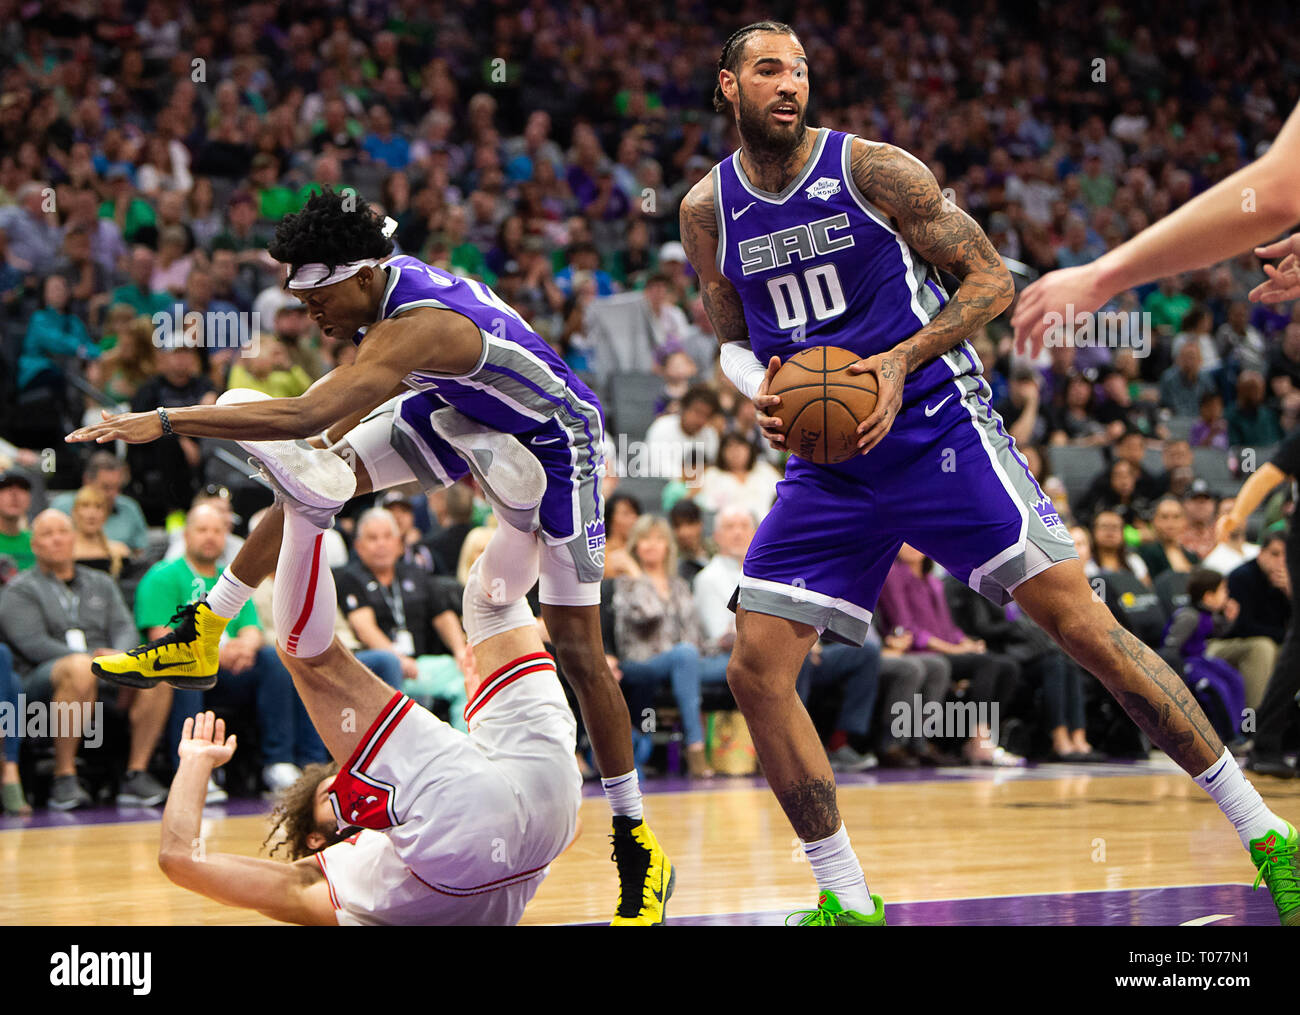 Sacramento, CA, USA. 17th Mar, 2019. Sacramento Kings center Willie Cauley-Stein (00) grabs ball from Chicago Bulls center Robin Lopez (42) as Sacramento Kings guard De'Aaron Fox (5) leaps over him during a game at Golden 1 Center on Sunday, March 17, 2019 in Sacramento. Credit: Paul Kitagaki Jr./ZUMA Wire/Alamy Live News Stock Photo